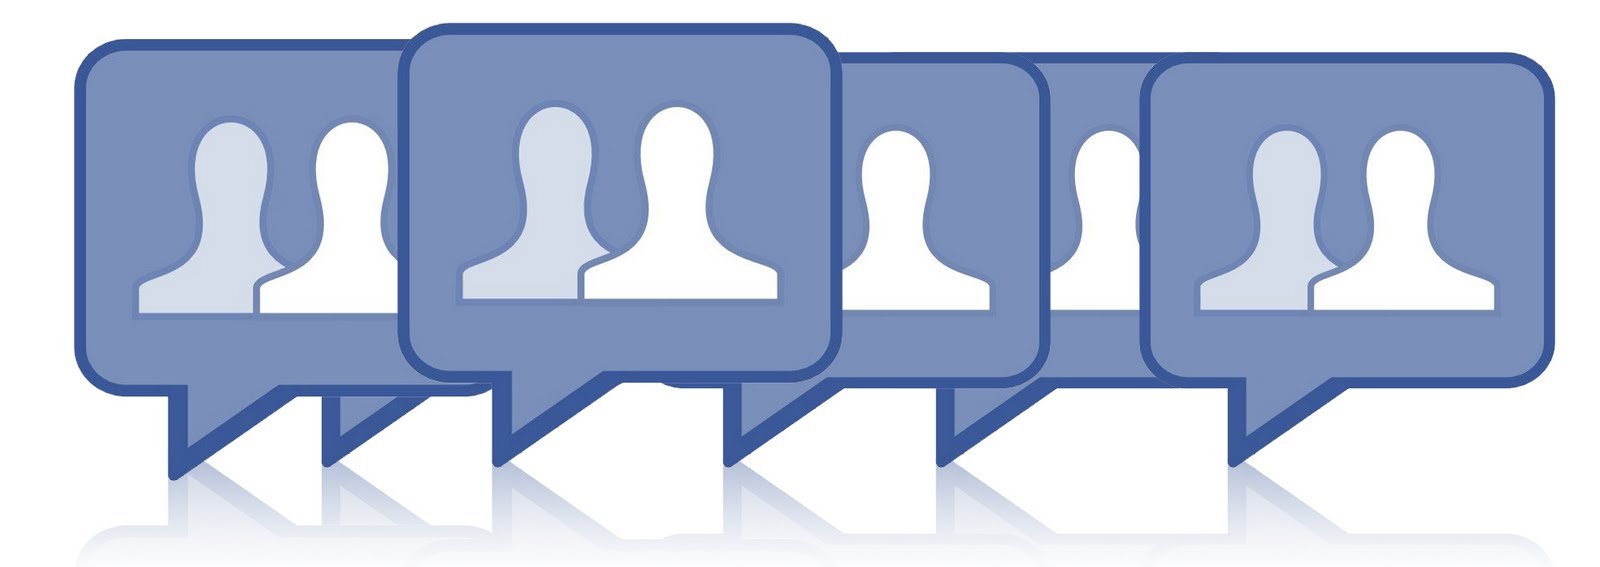 Facebook Fun for Churches Part 1: Pages and Groups